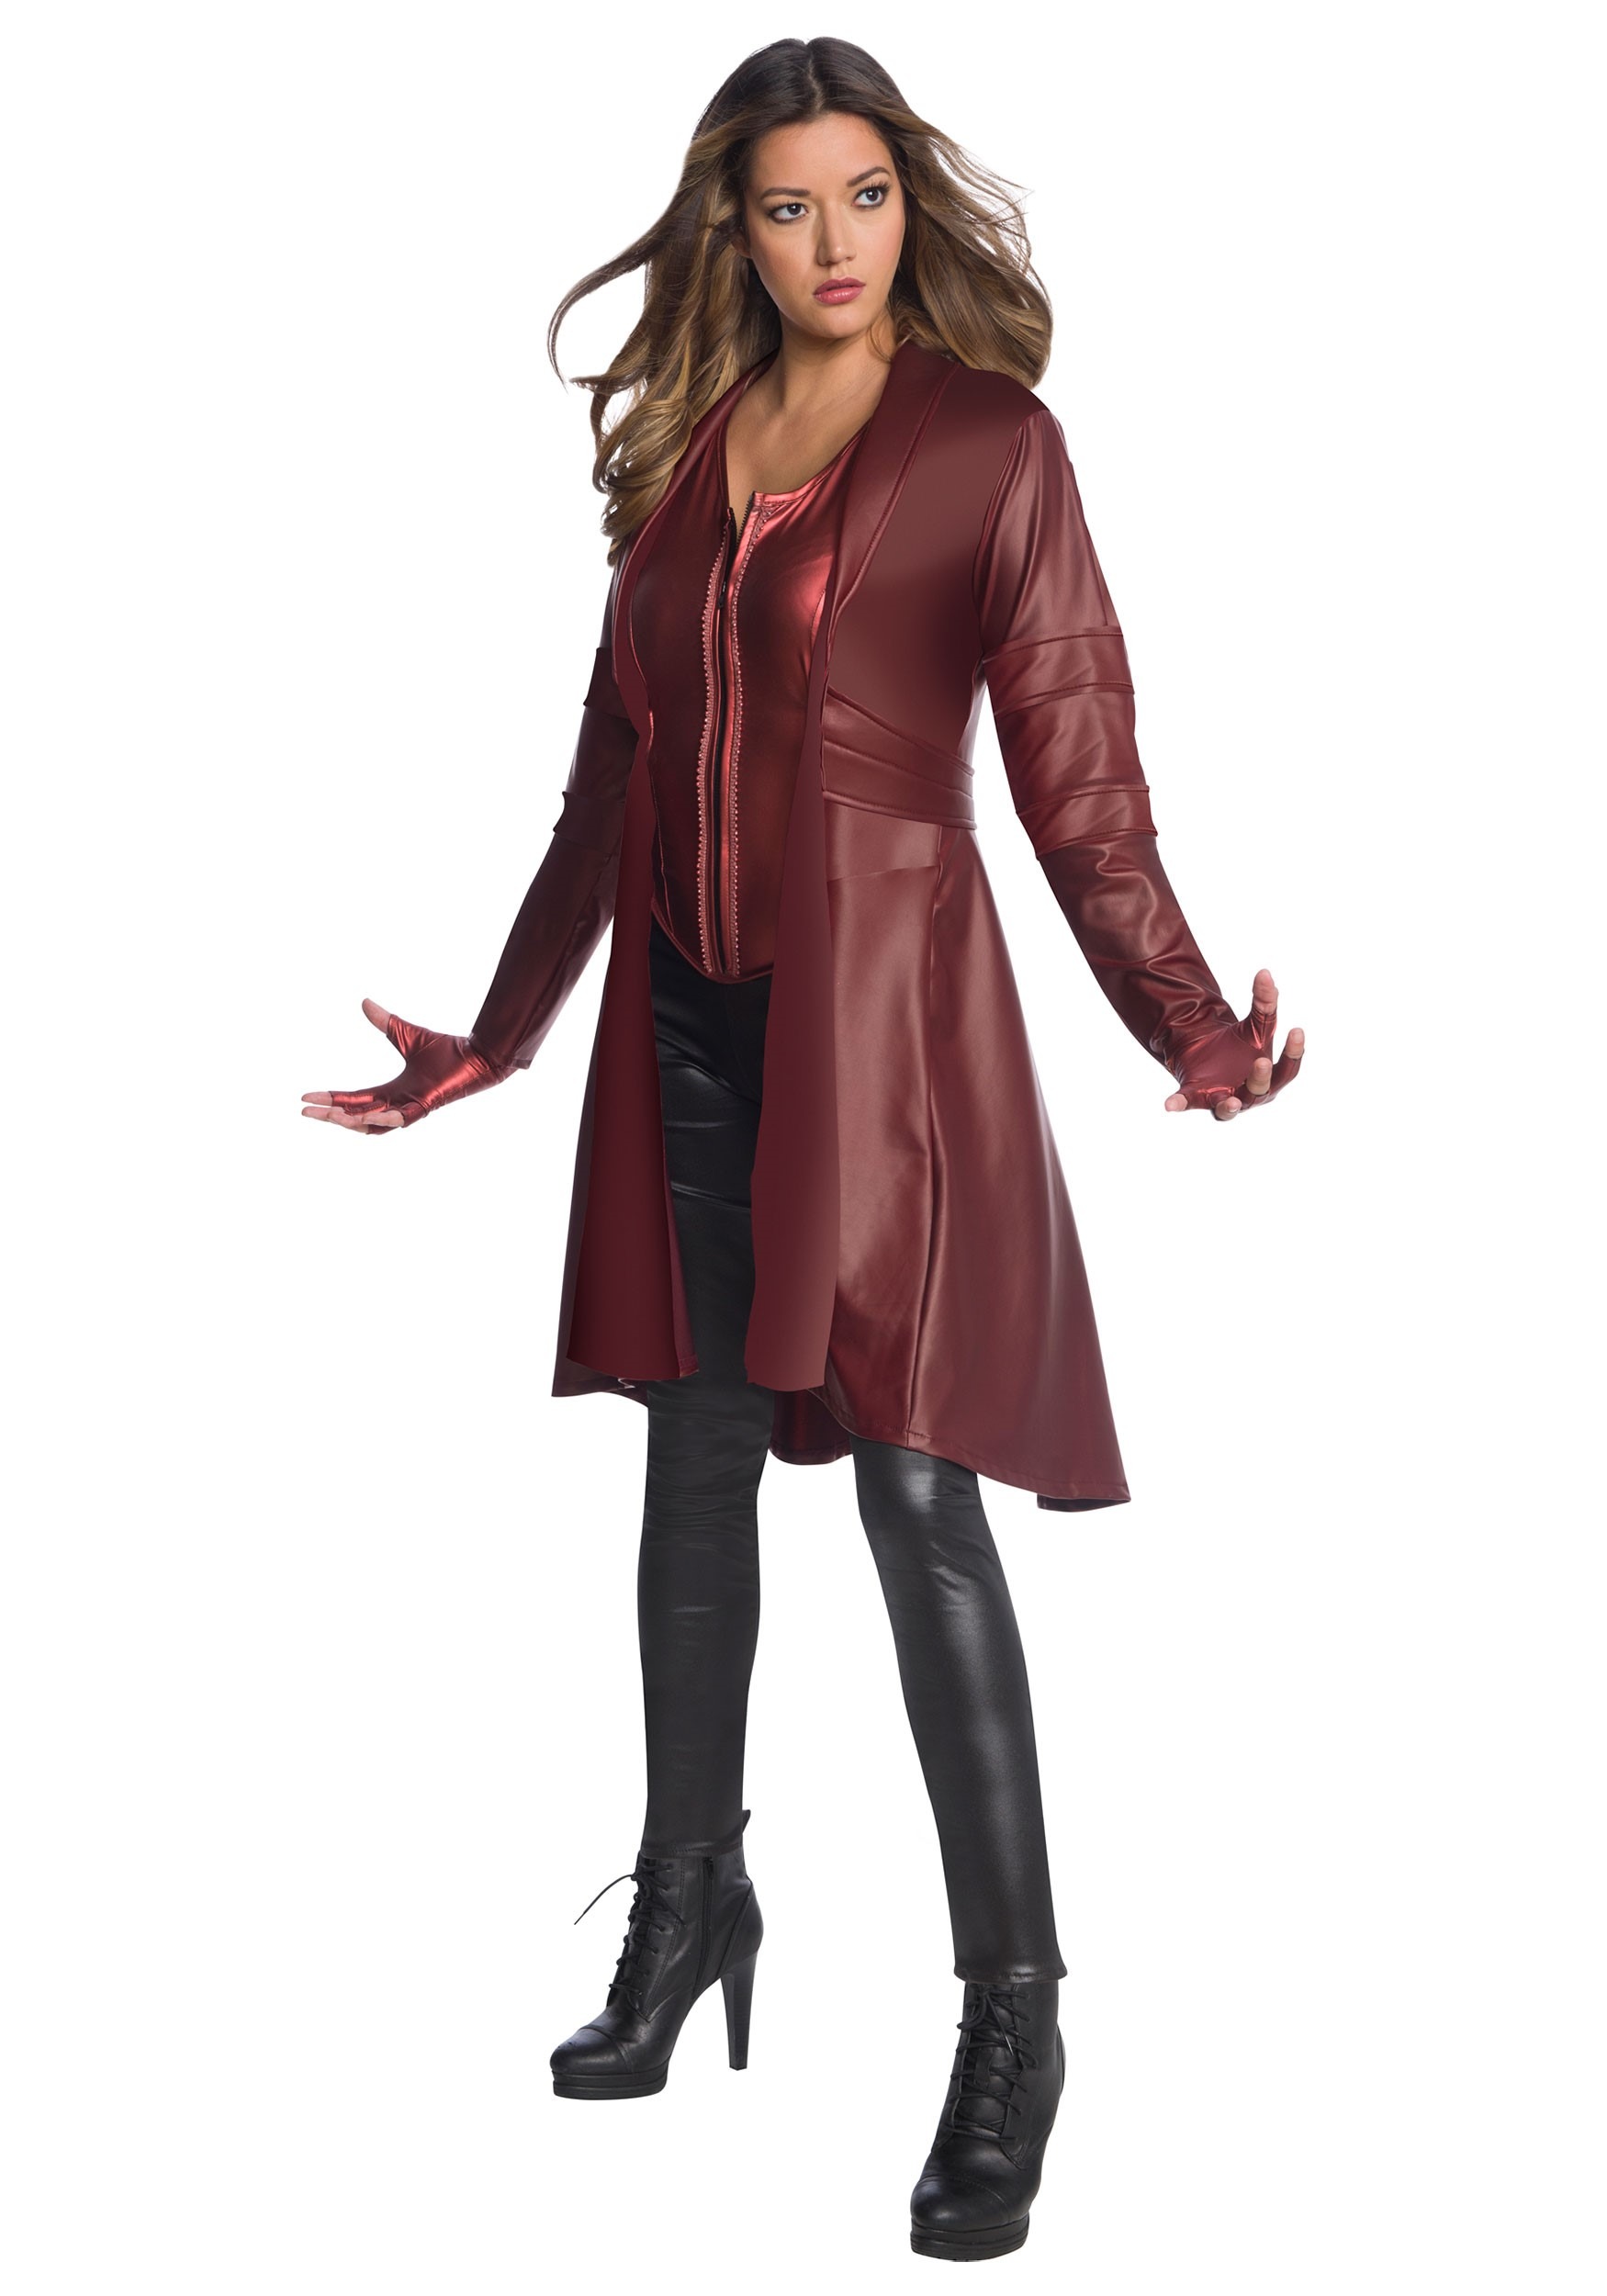 Womens Avengers Endgame Scarlet Witch Secret Wishes Costume